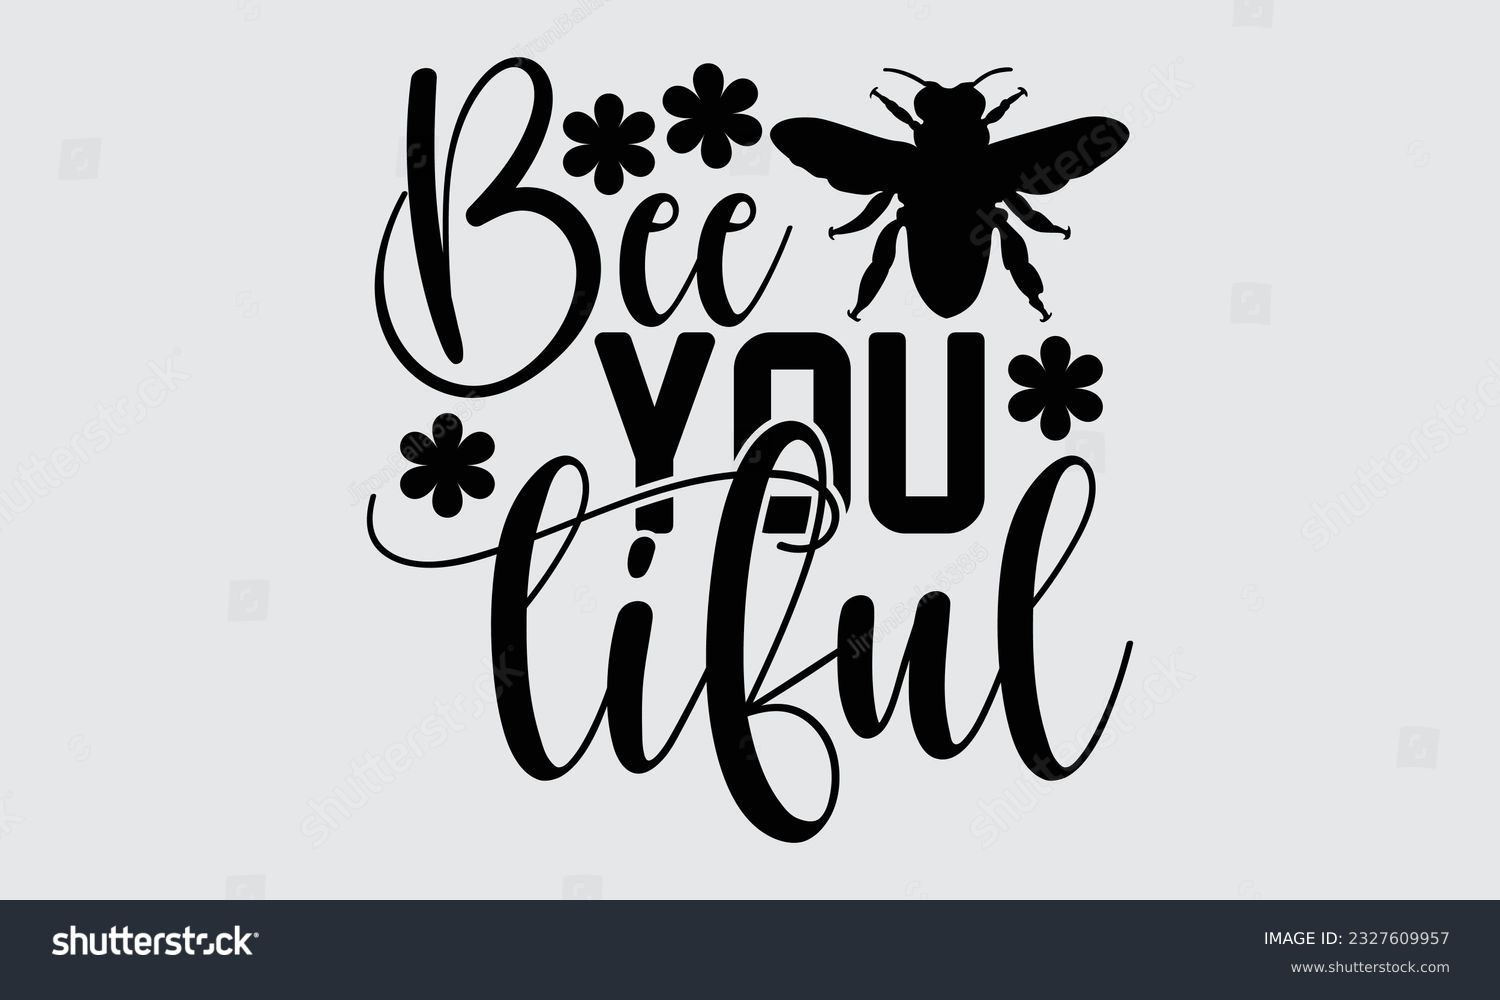 SVG of Bee You Tiful - Bee svg typography t-shirt design, this illustration can be used as a print on Stickers, Templates, and bags, stationary or as a poster. svg